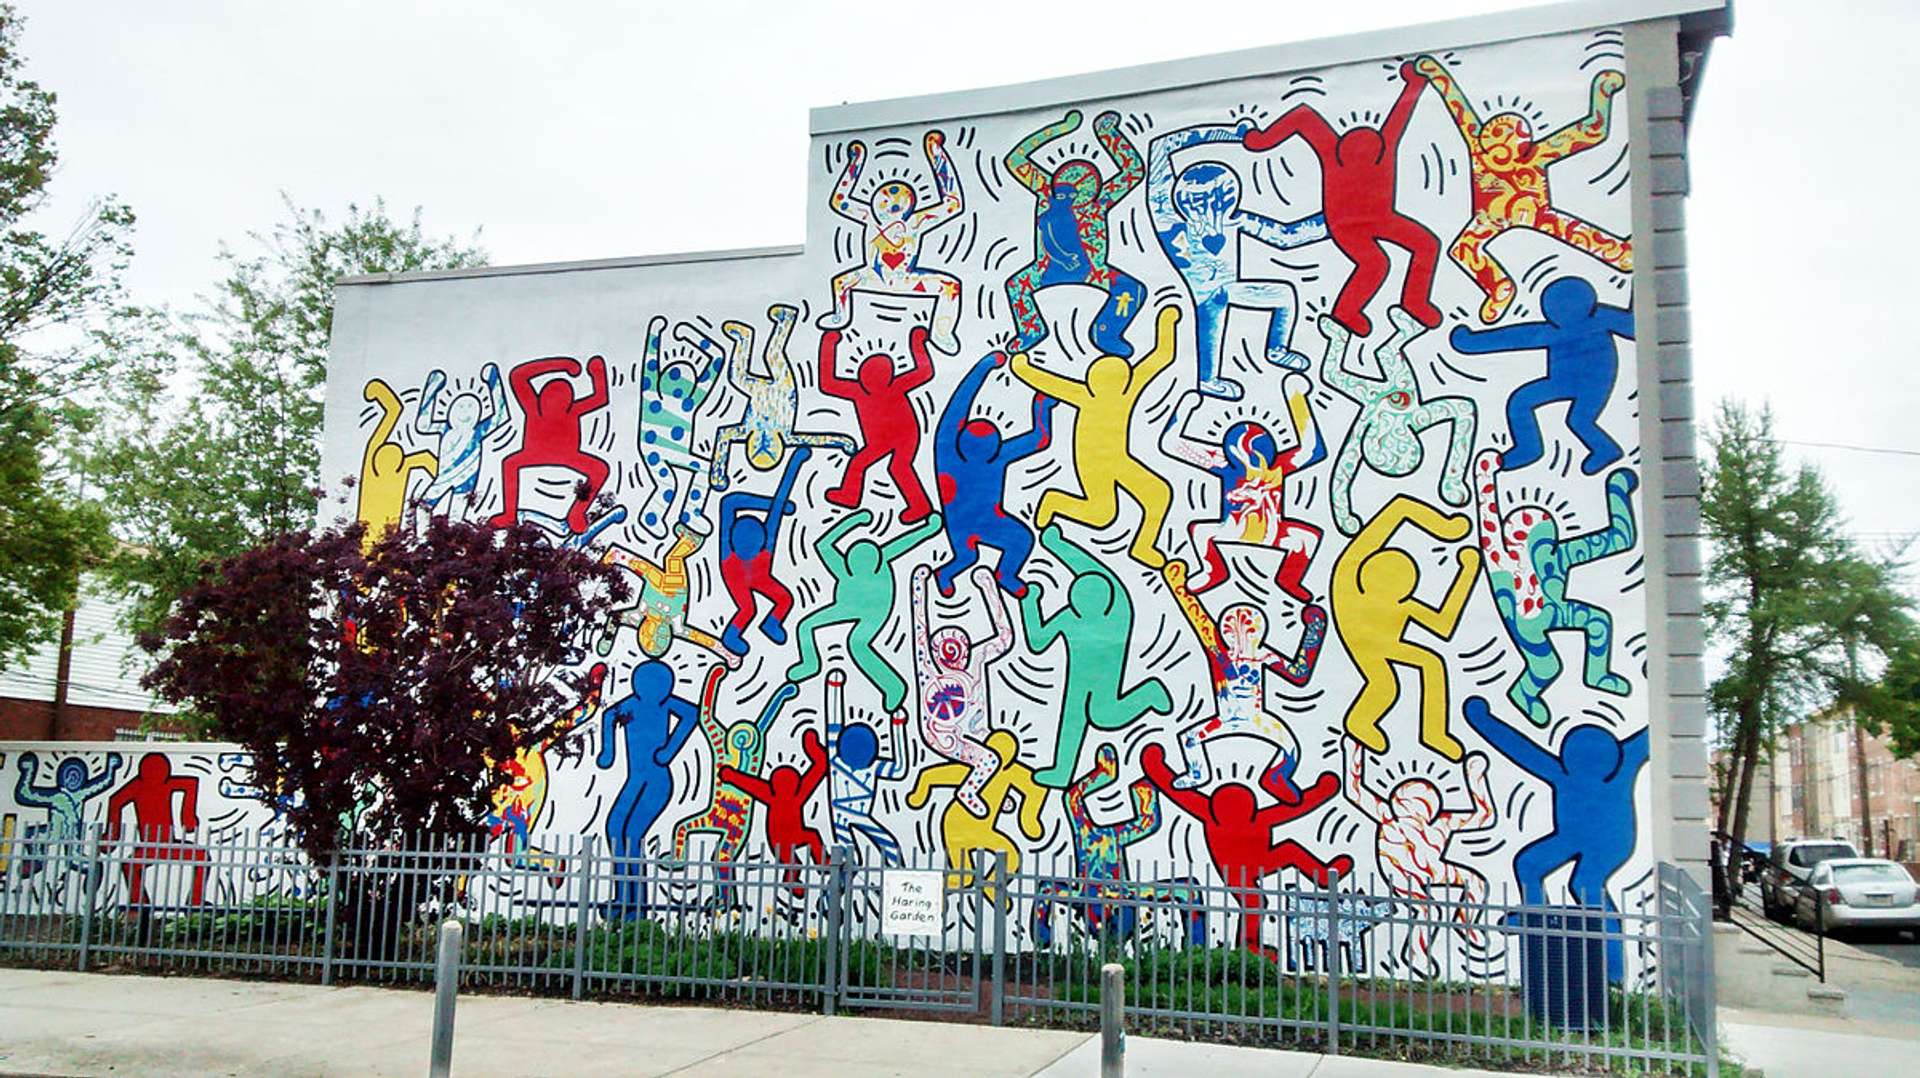 The Relationship Between Keith Haring's Art and the Emergence of